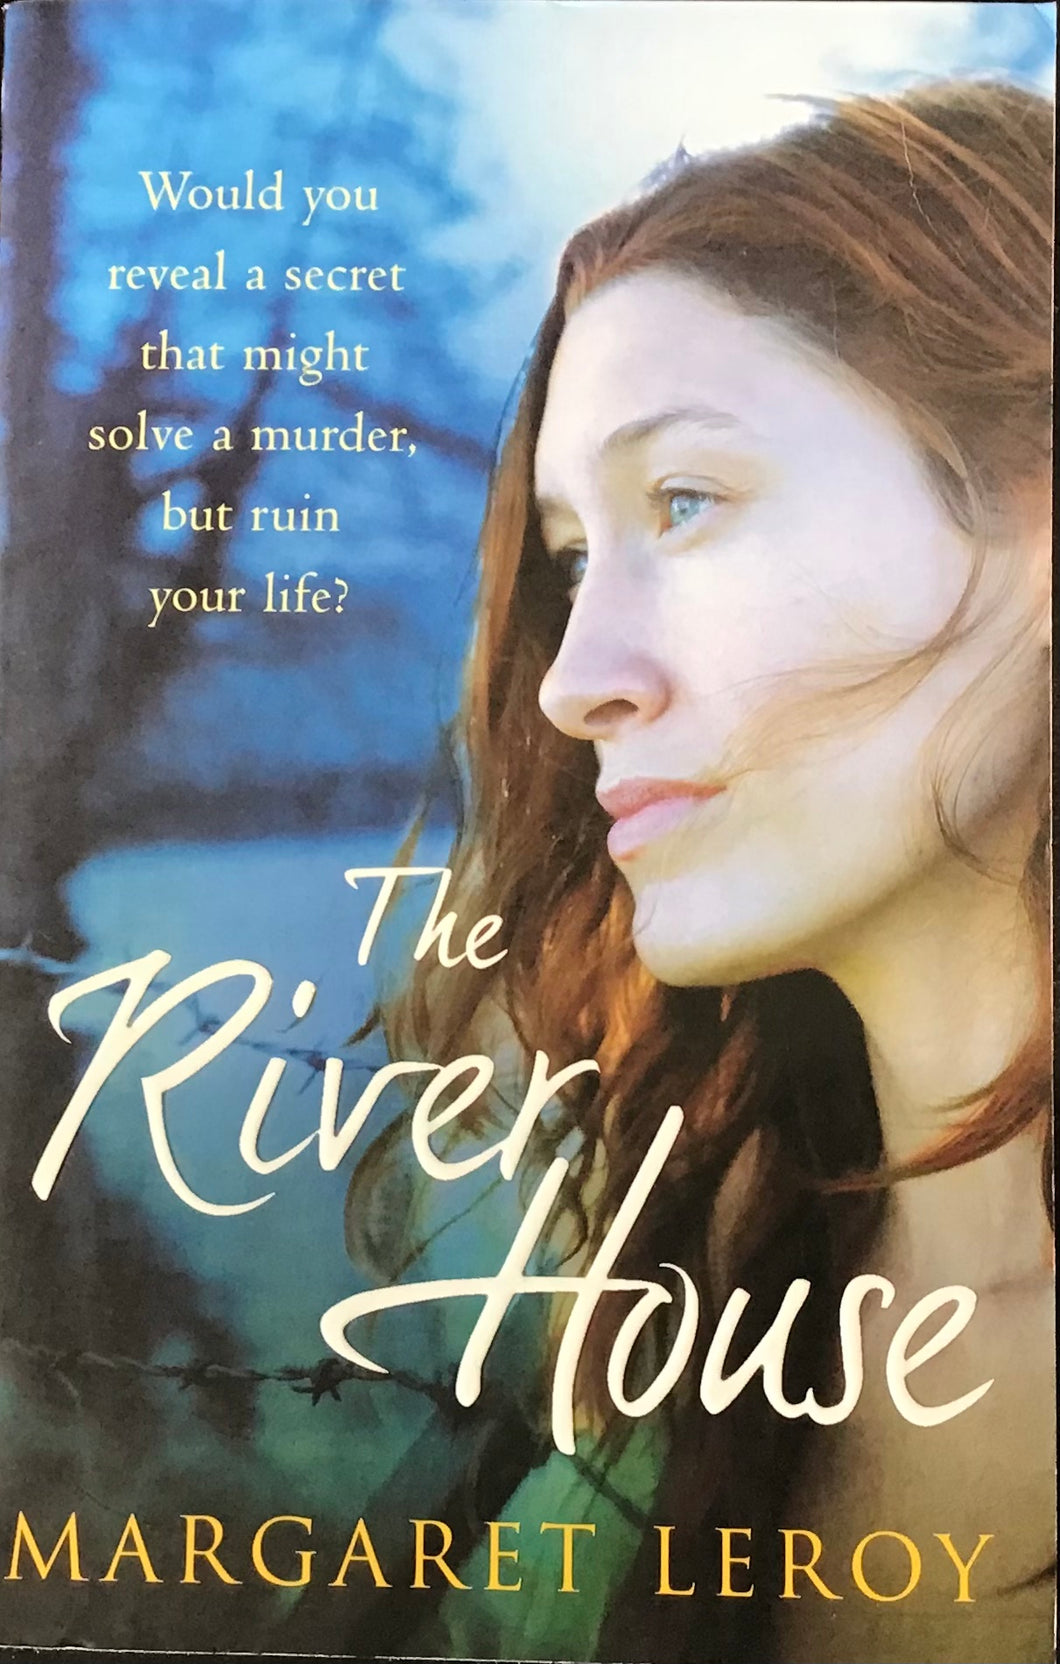 The River House- Margaret Leroy